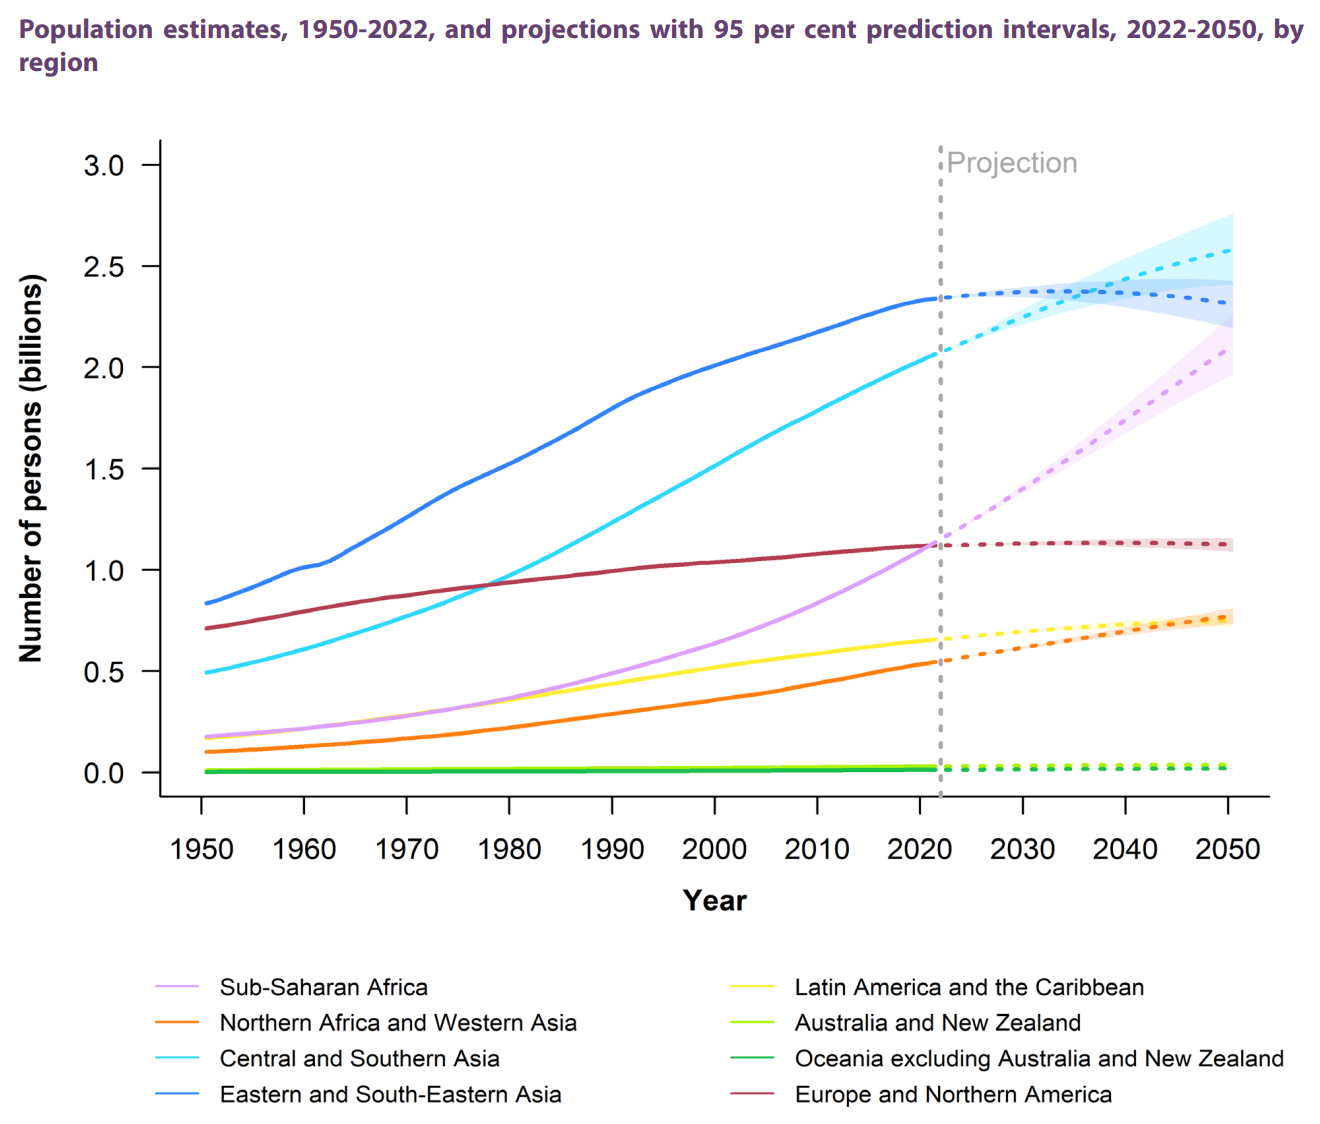 Human population estimates, 1950-2022, and projections with 95 percent prediction intervals, 2022-2050, by region. The global population is still growing, albeit at a reduced rate. Some countries and regions continue to experience further population growth, while others have witnessed a stabilization or begun to decrease in population size. The world’s two most populous regions in 2022 were Eastern and South-Eastern Asia, with 2.3 billion people, representing 29 per cent of the global population, and Central and Southern Asia, with 2.1 billion (26 percent). China and India accounted for the largest populations in these regions, with more than 1.4 billion each in 2022. Graphic: UN DESA
